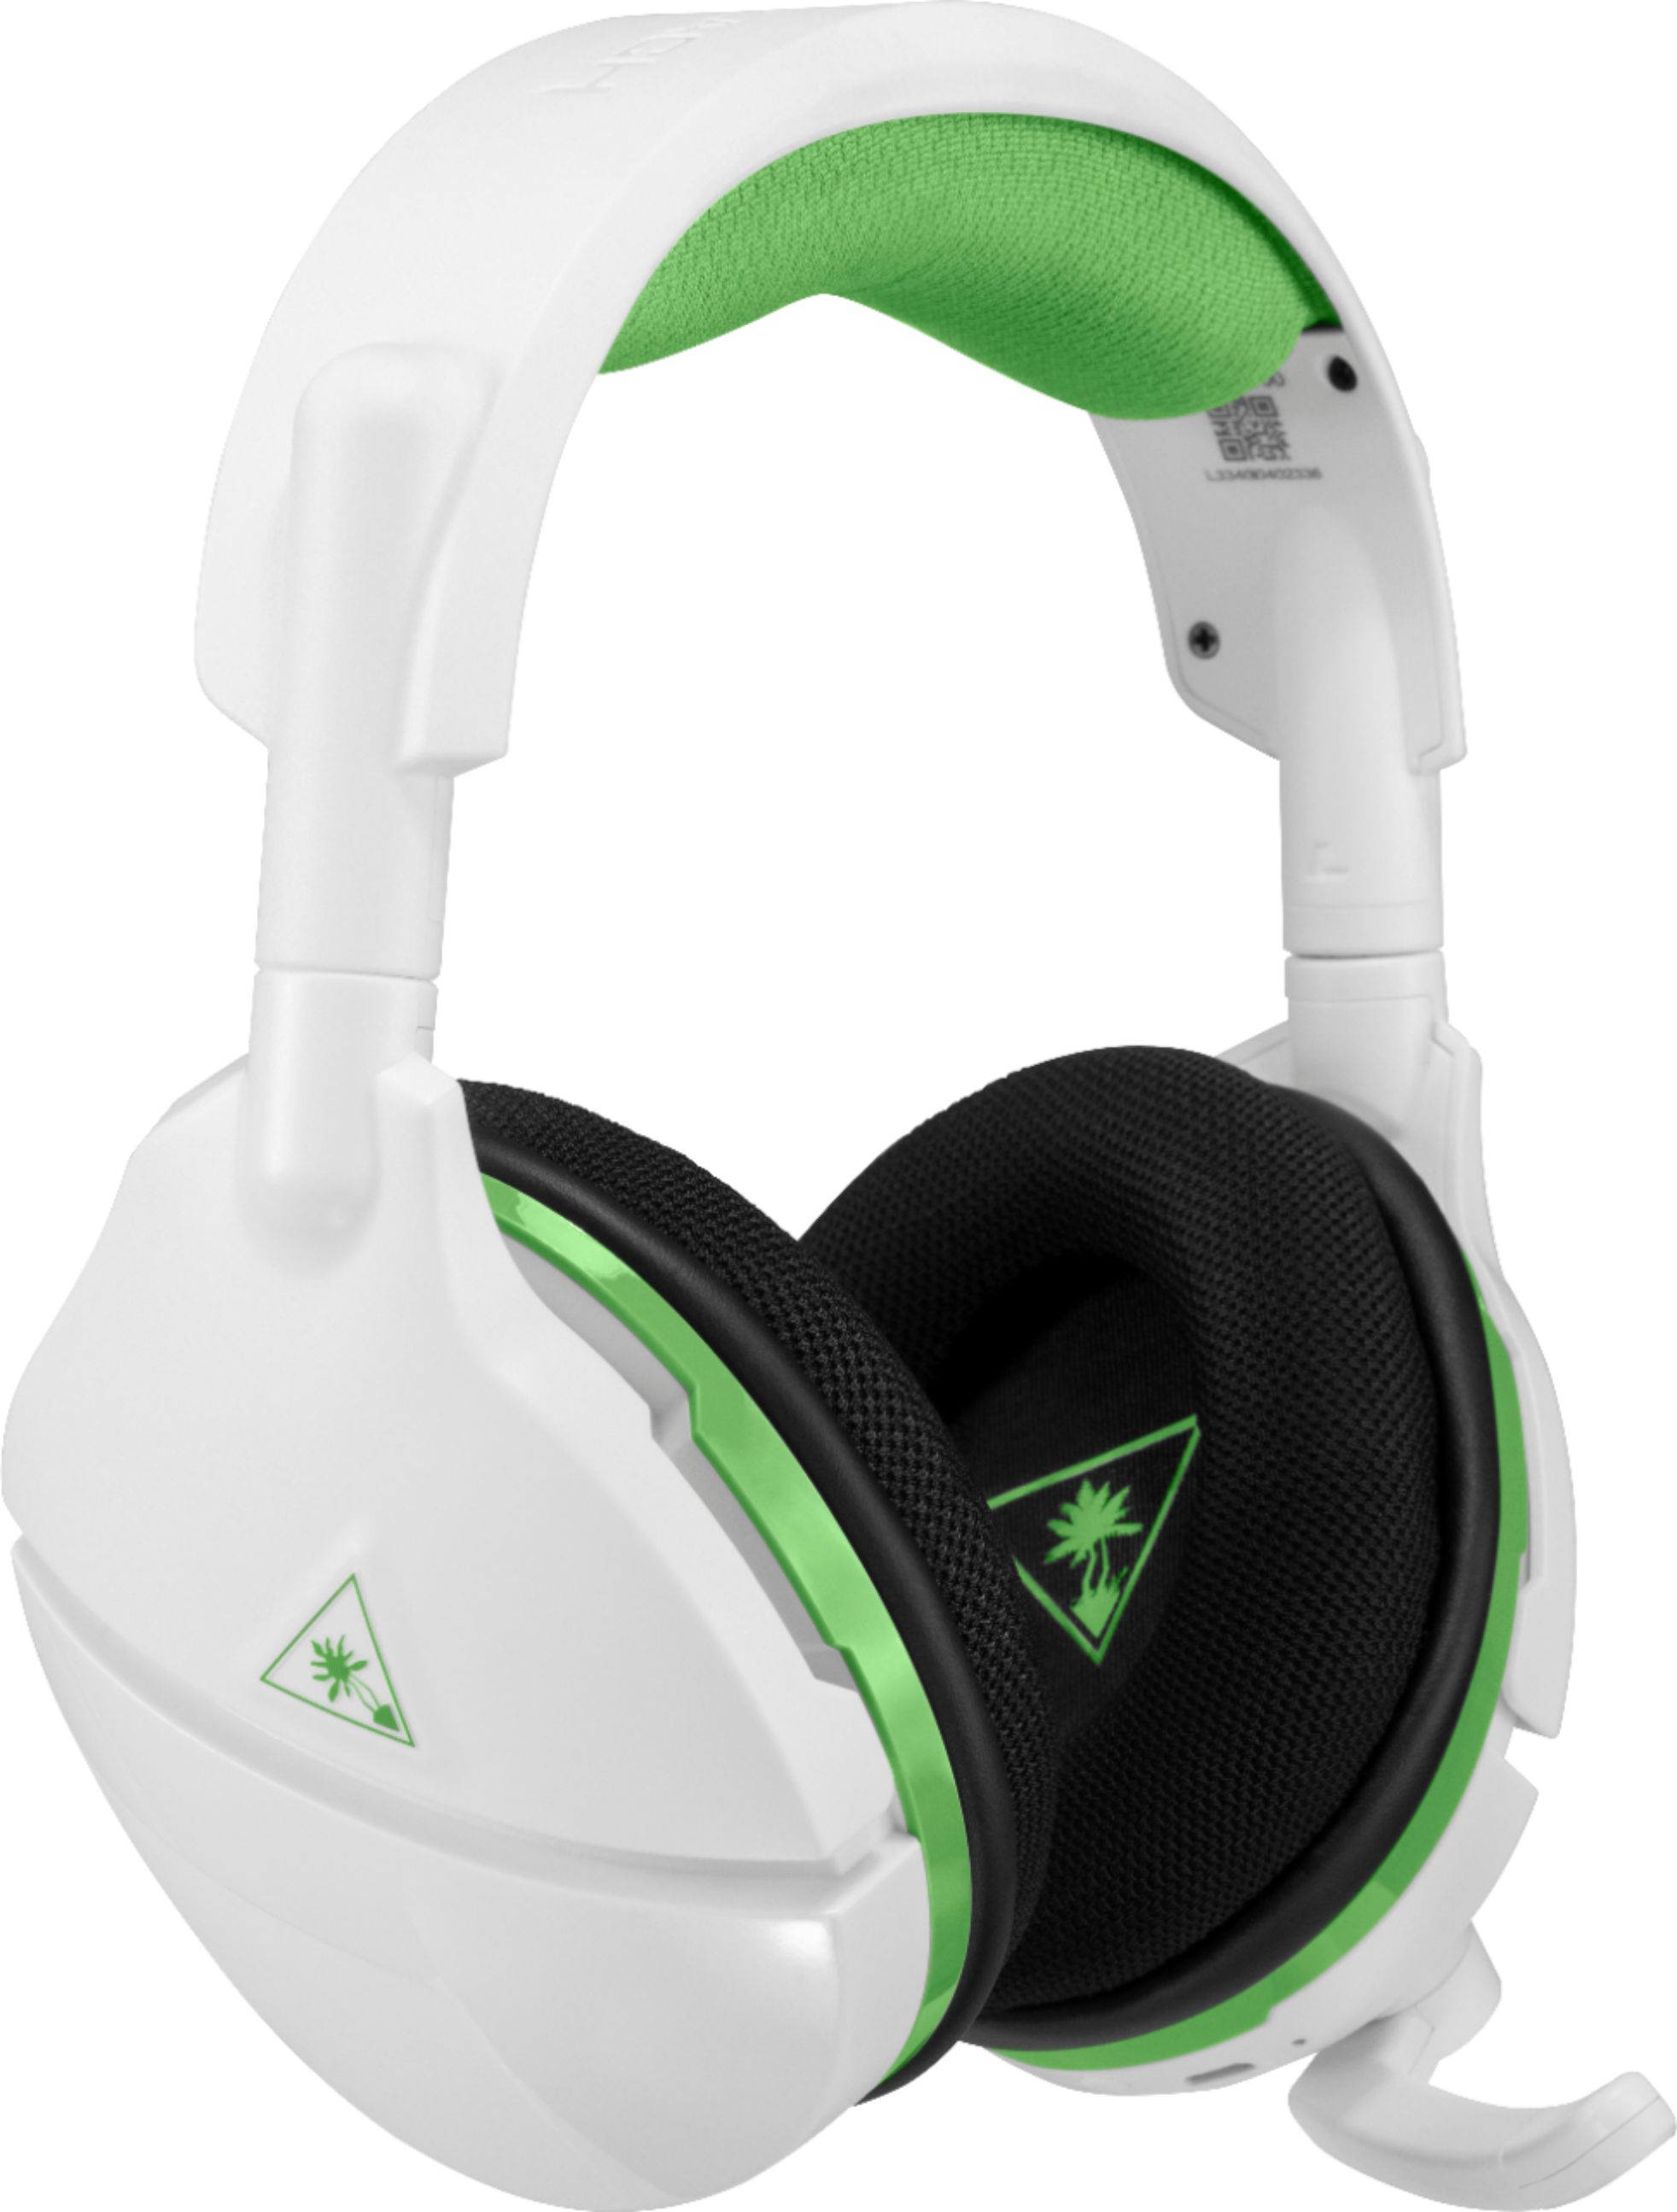 wireless gaming headphones with mic for xbox one